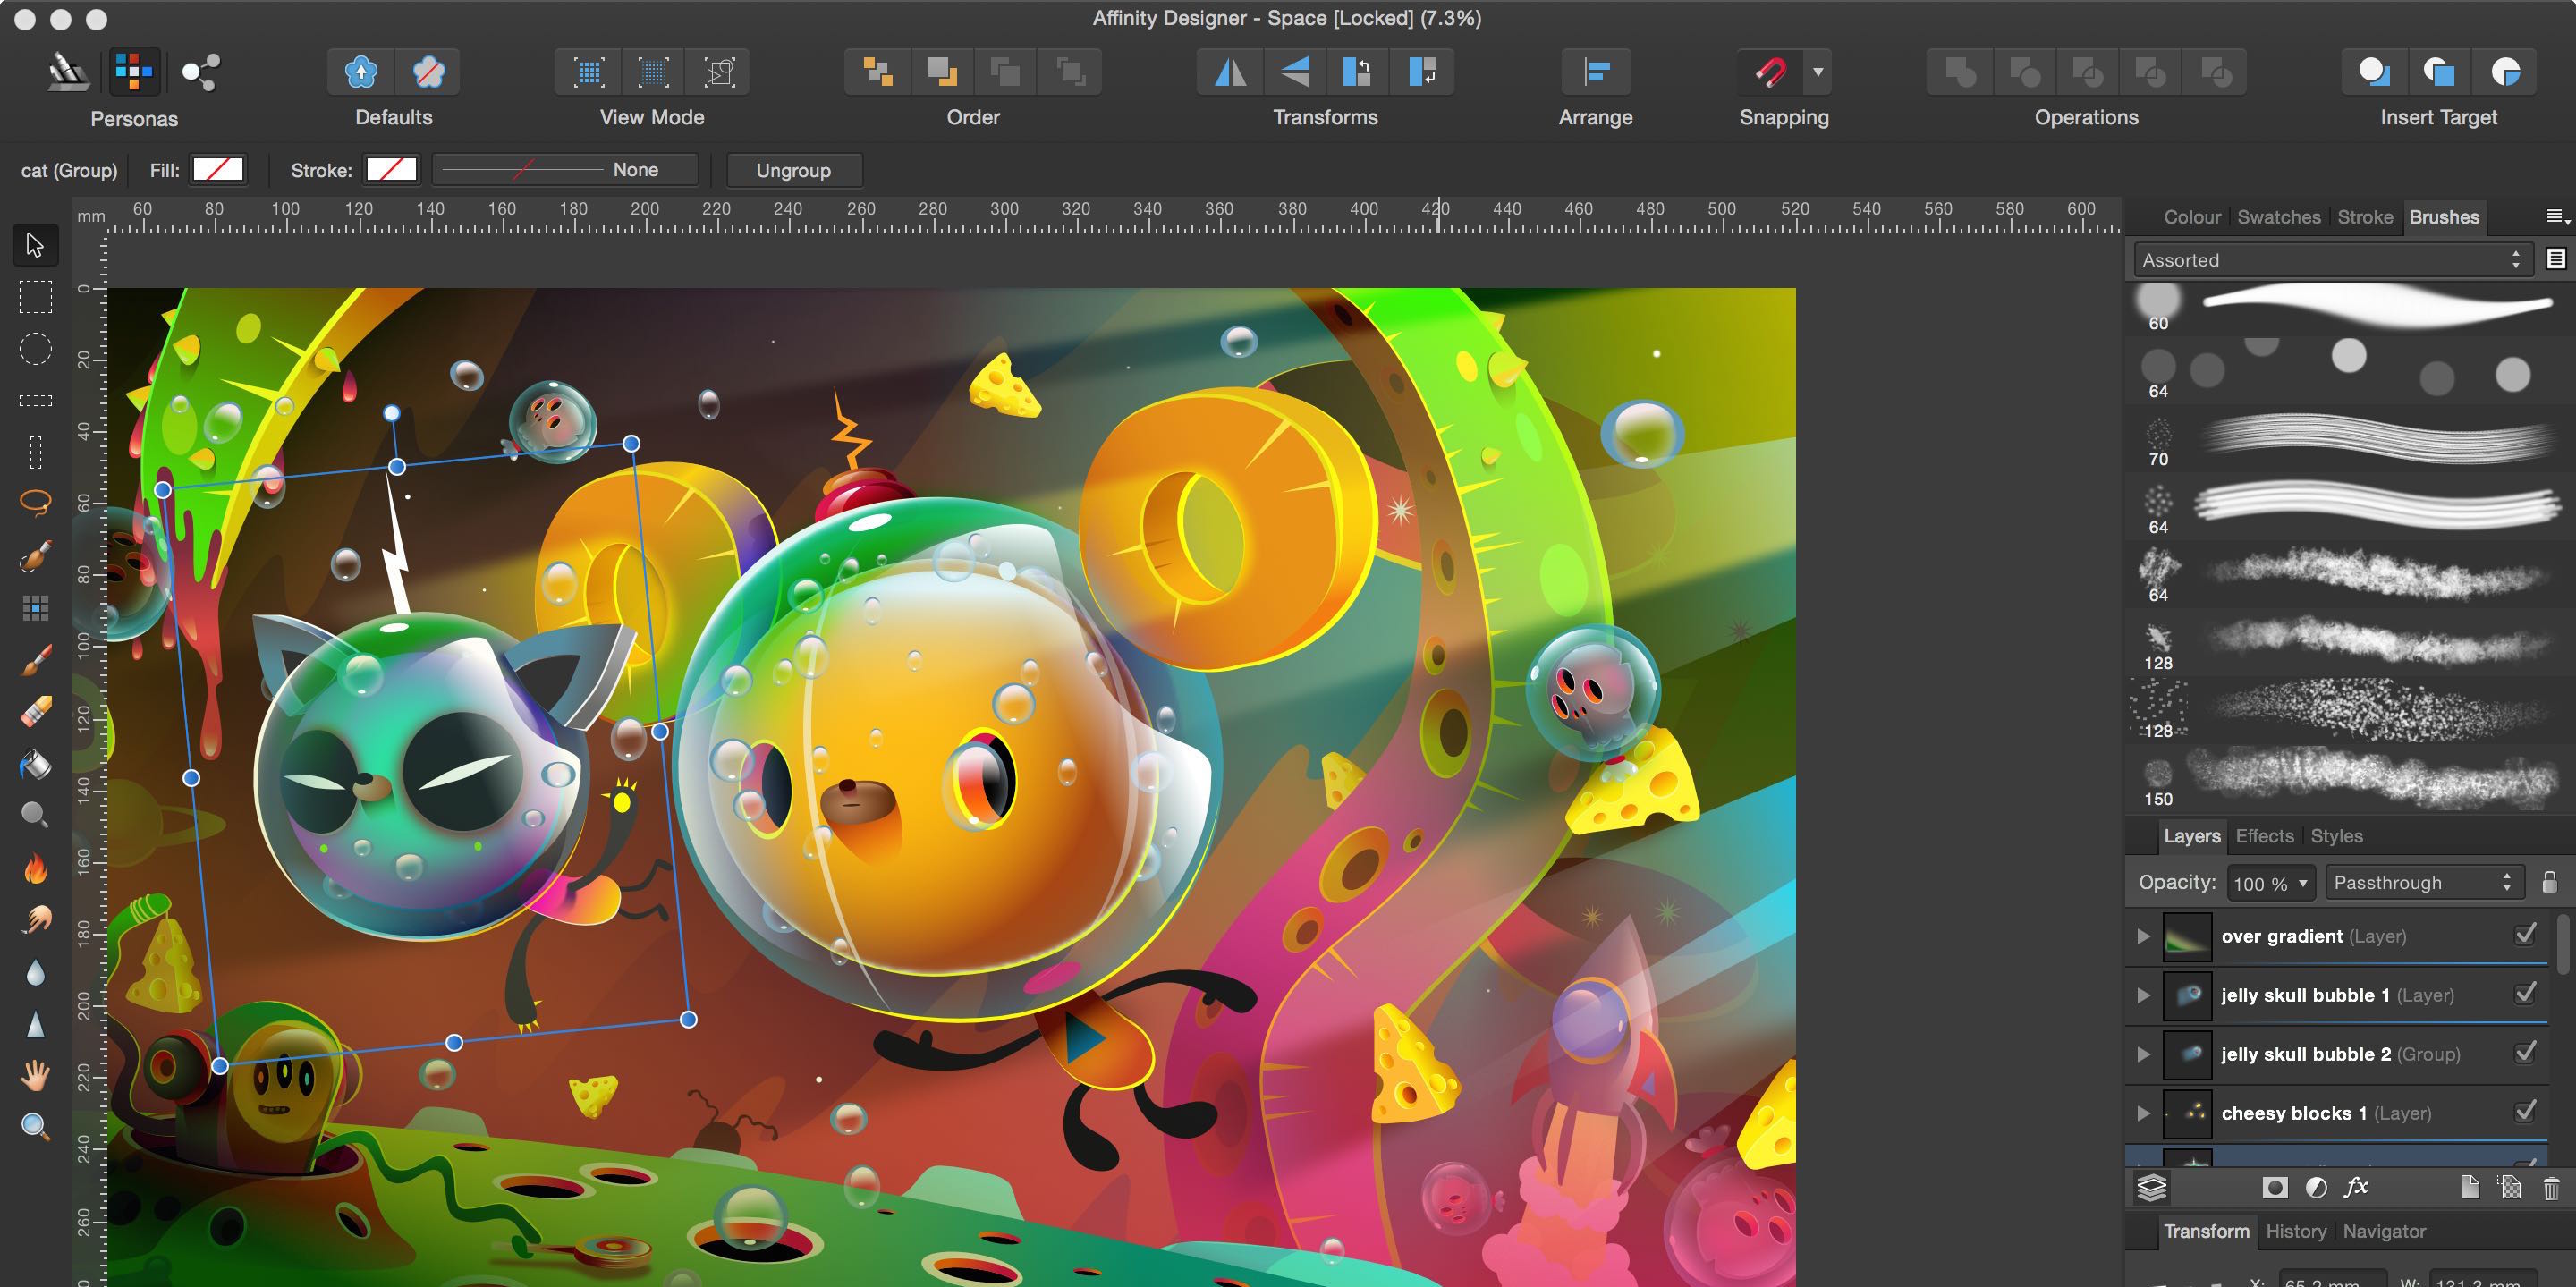 instal the last version for apple Affinity Publisher